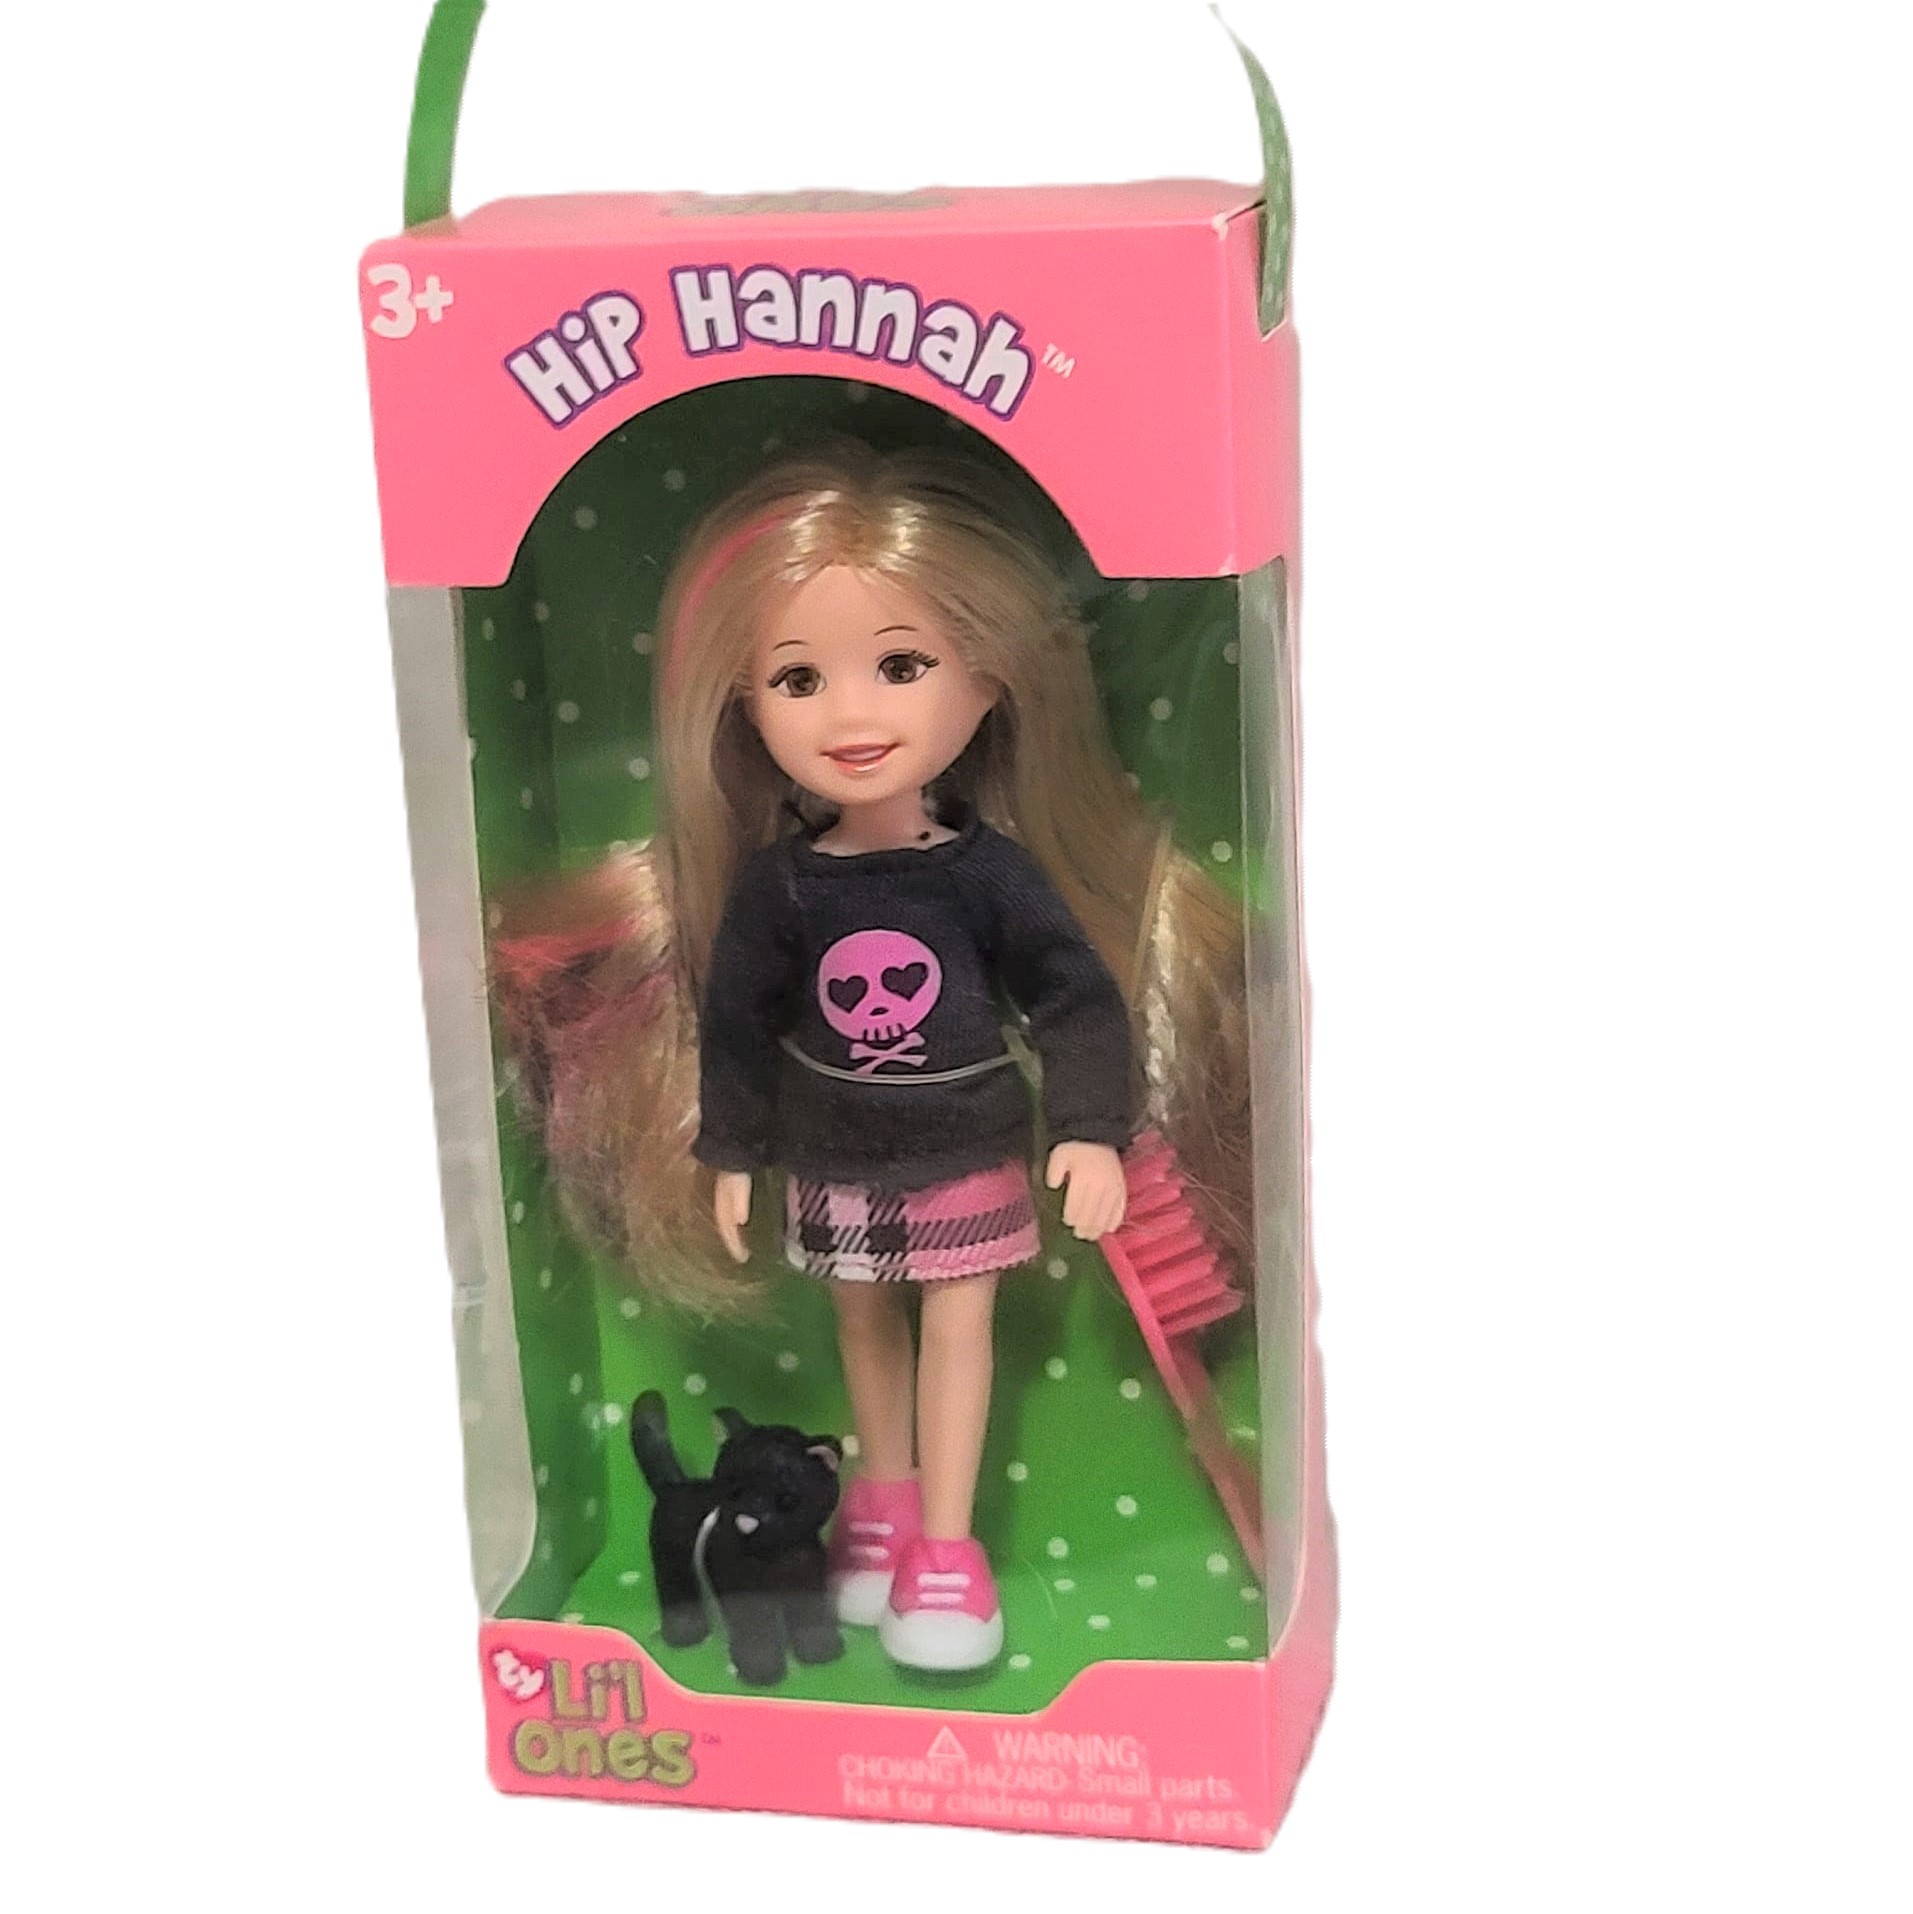 TY Li'l Ones Doll Hip Hannha with her black cat 2010 - Click Image to Close